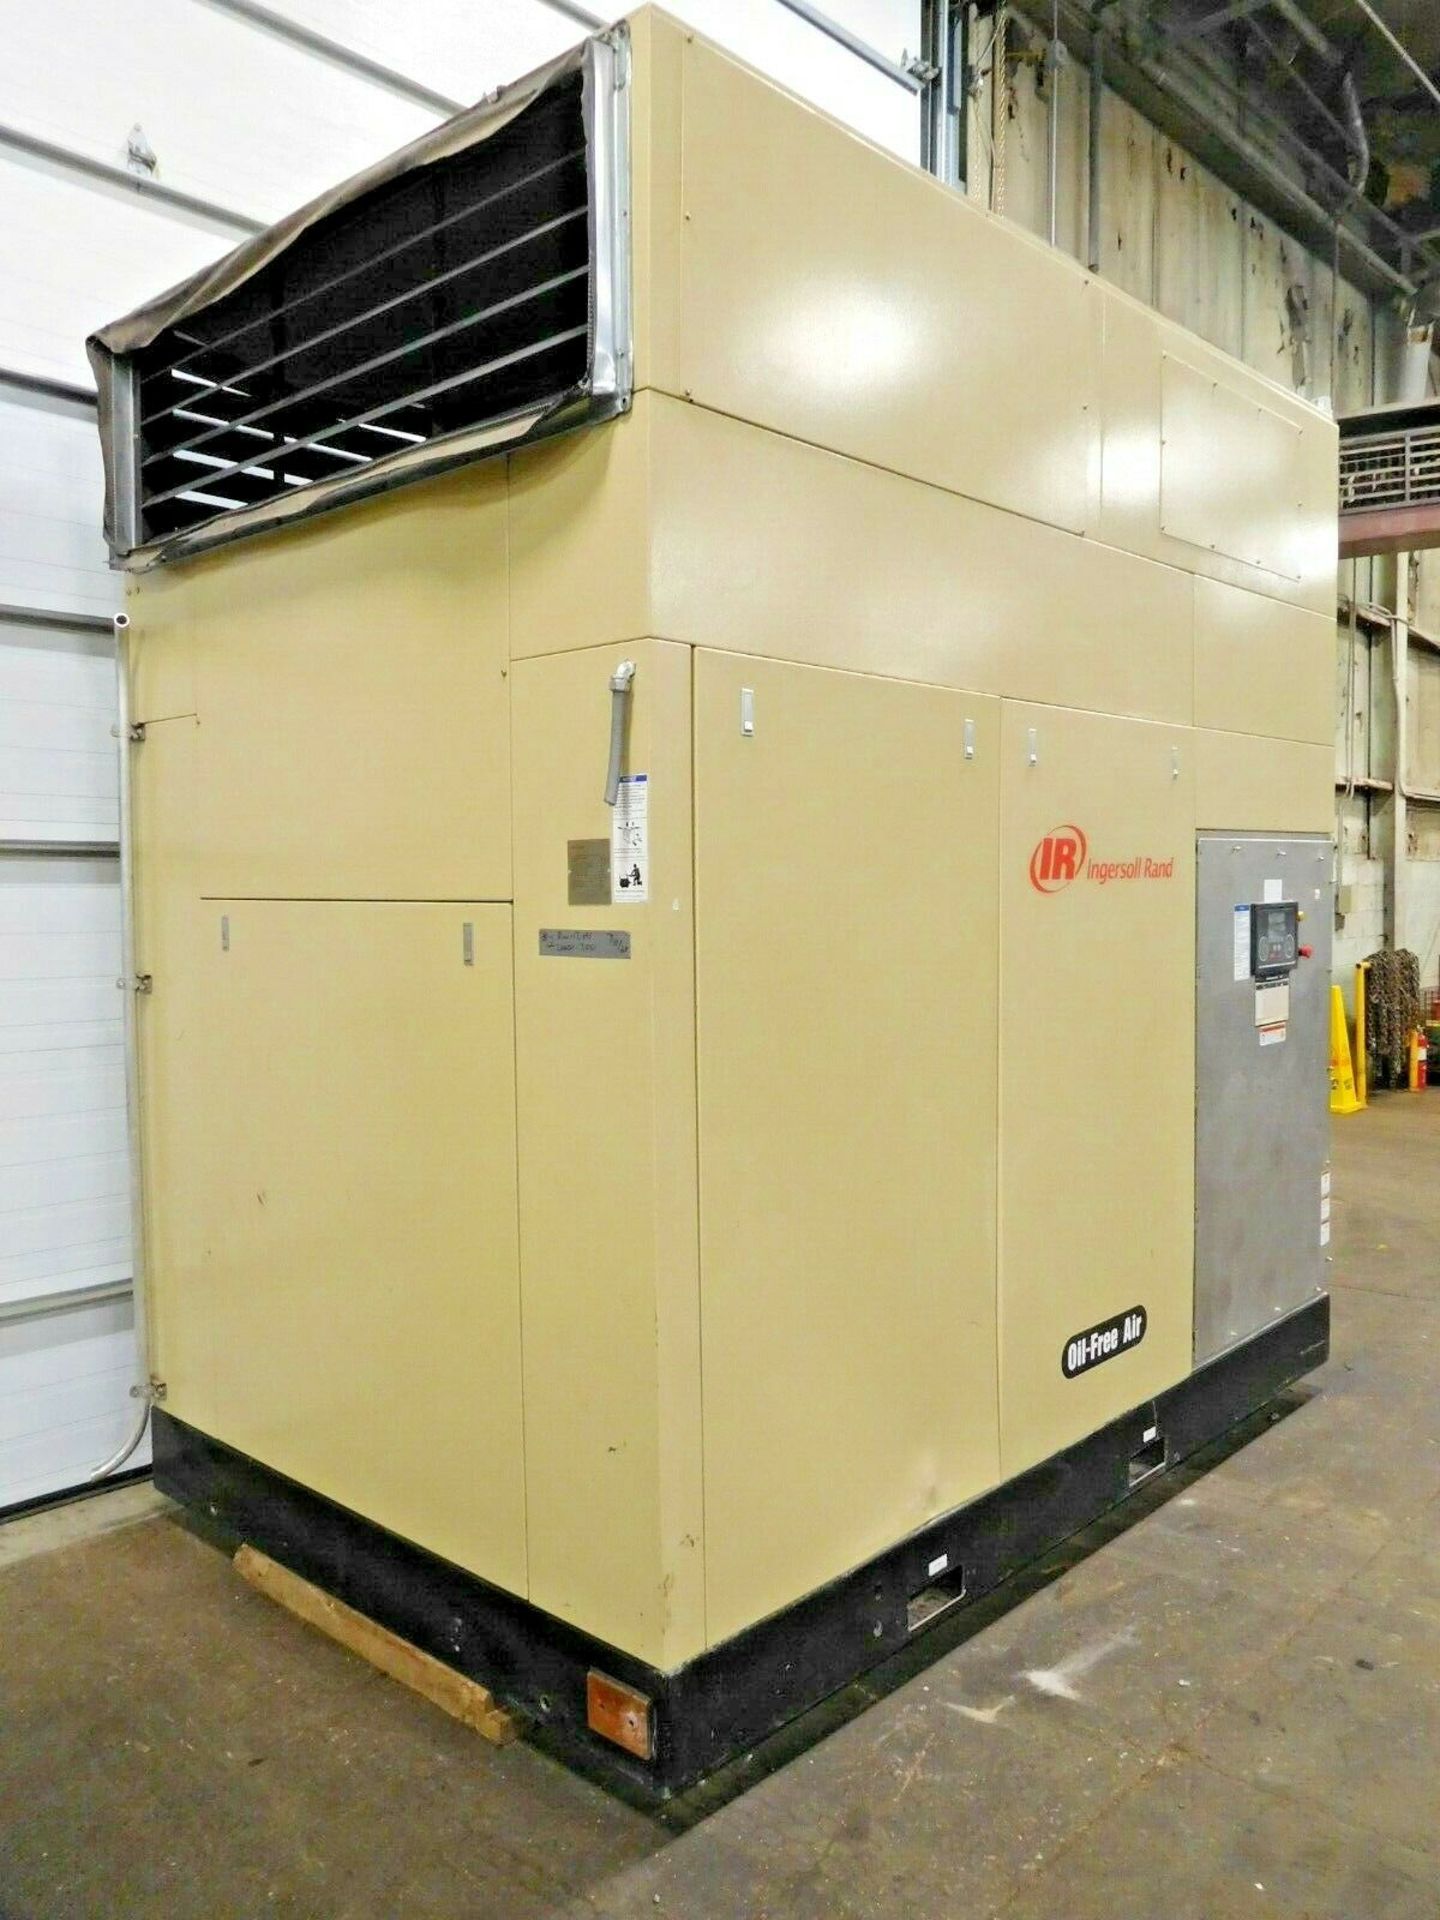 Ingersoll Rand H300 Rotary Screw Air Compressor. 1264 ACFM. 350 HP. - Image 3 of 7